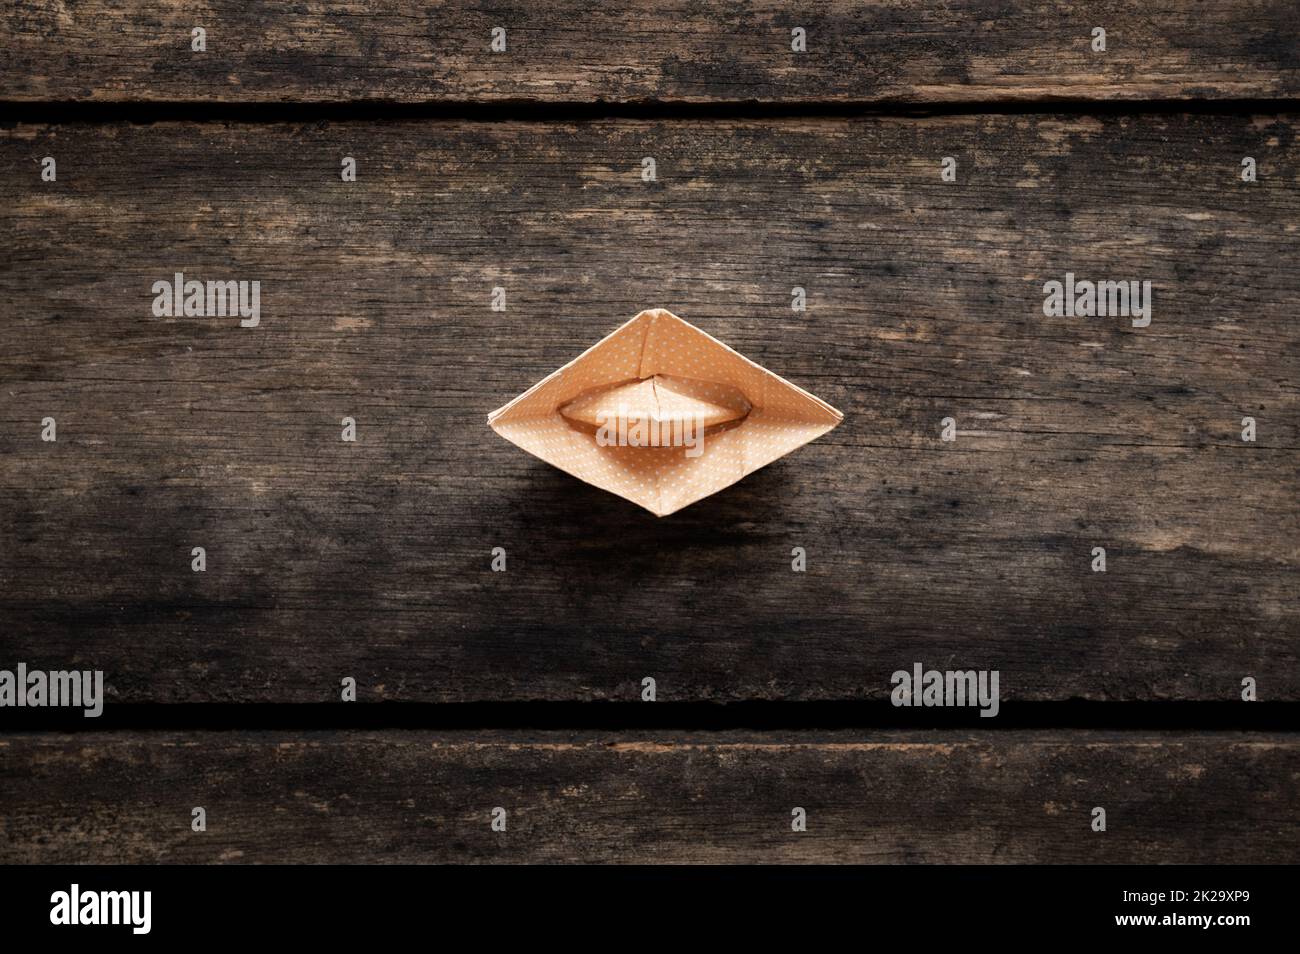 Top view of an origami boat made of polka dot paper placed on rustic wooden boards. Stock Photo